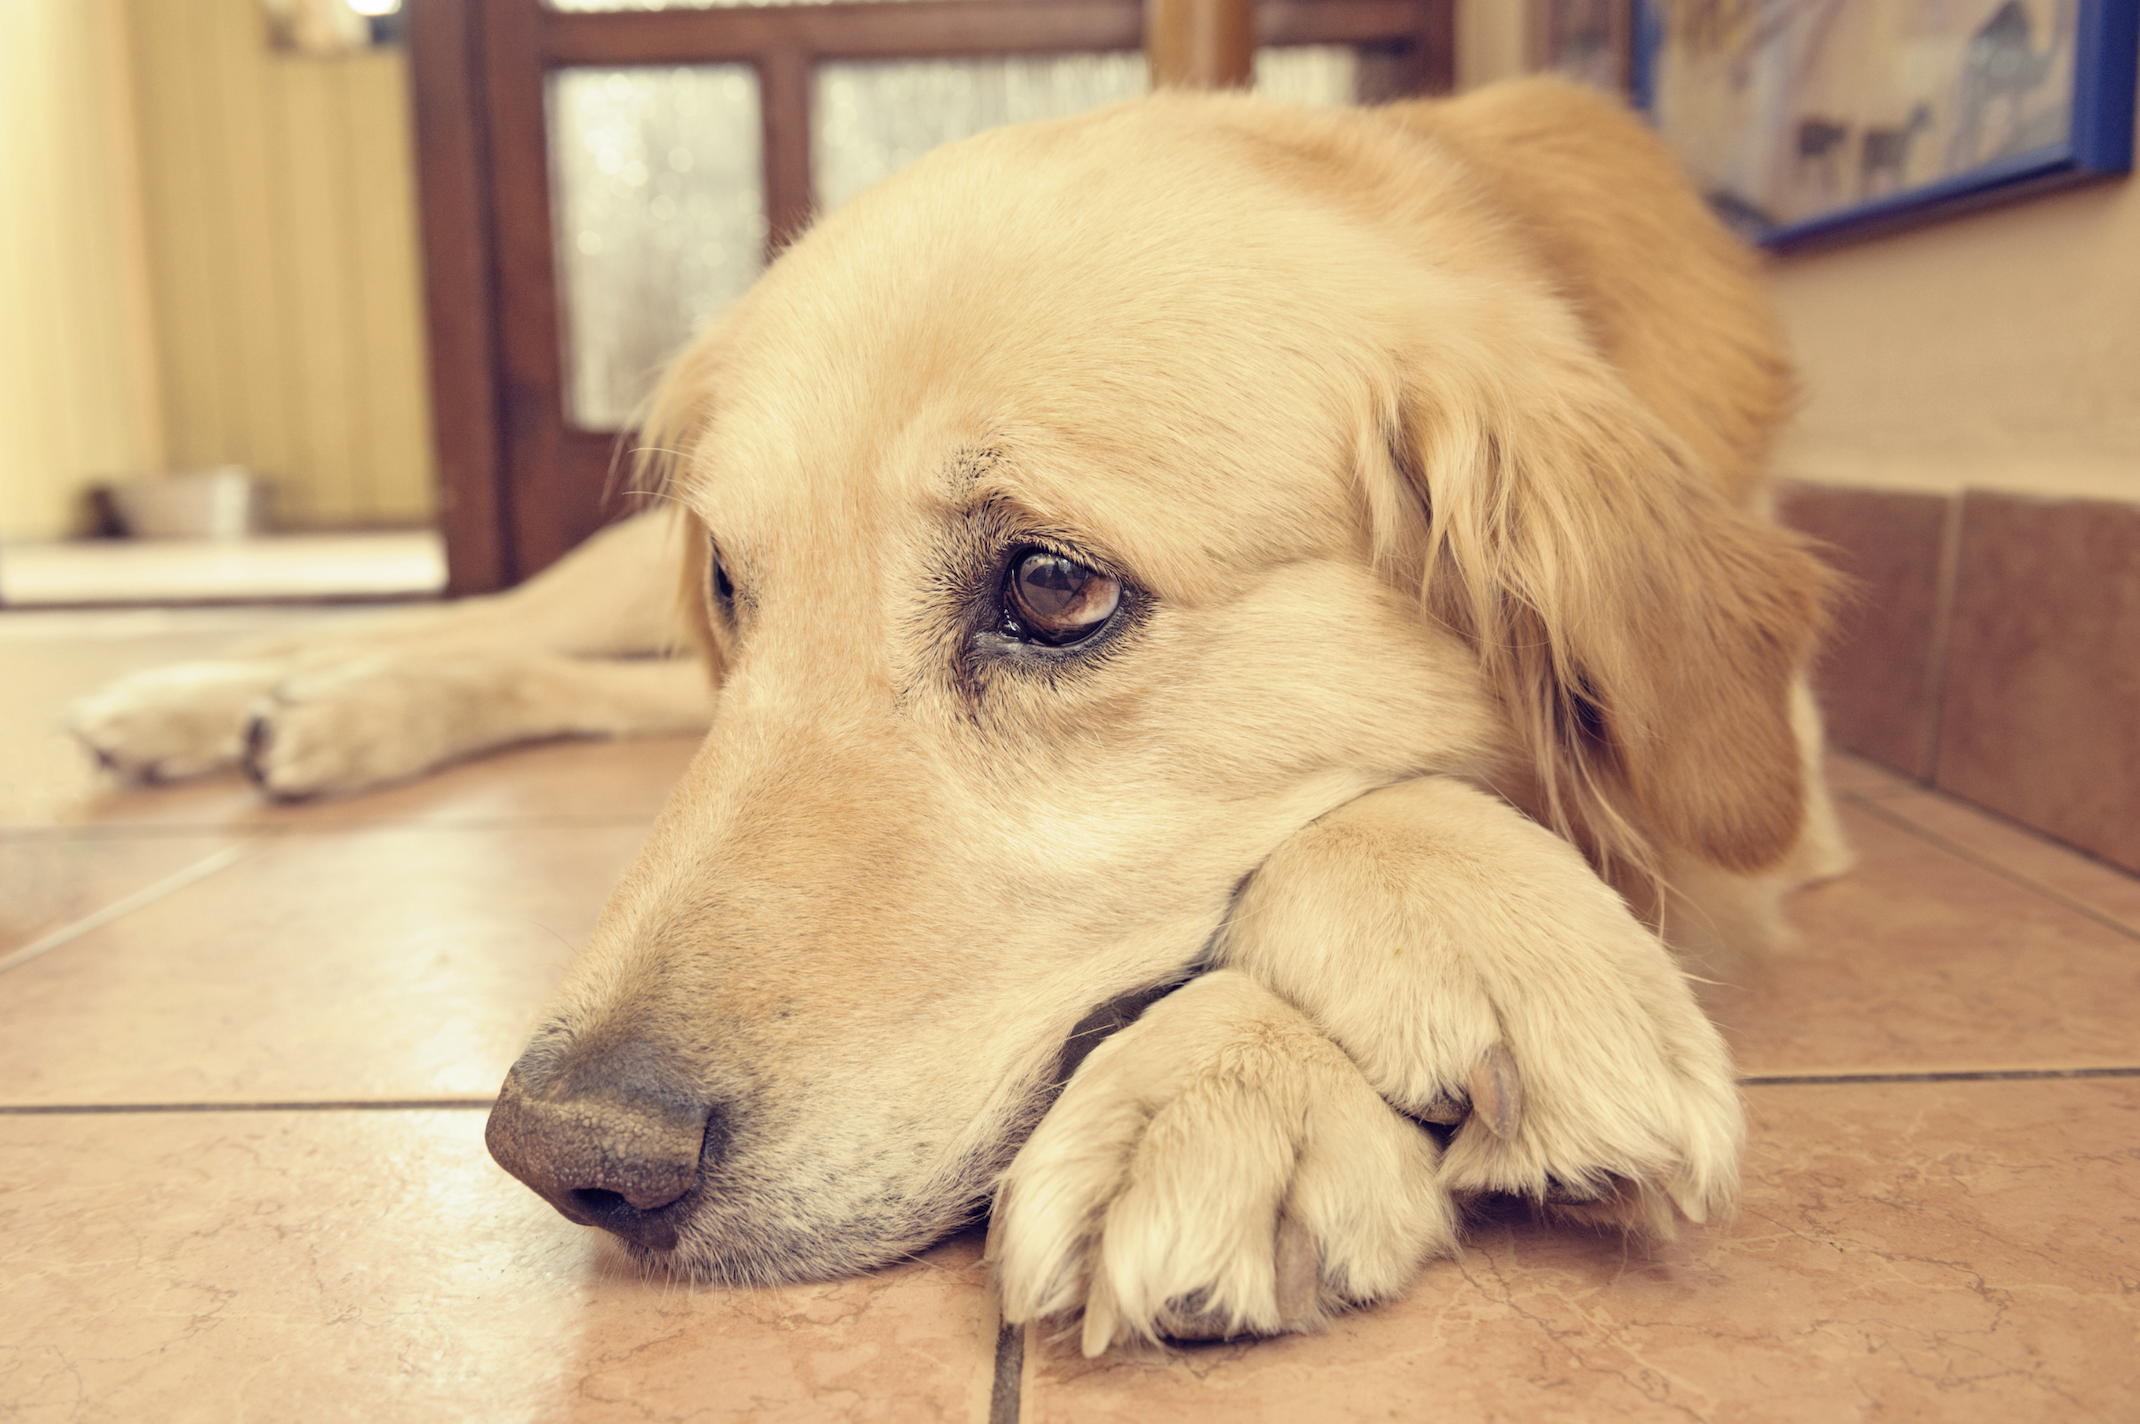 Separation anxiety in dogs